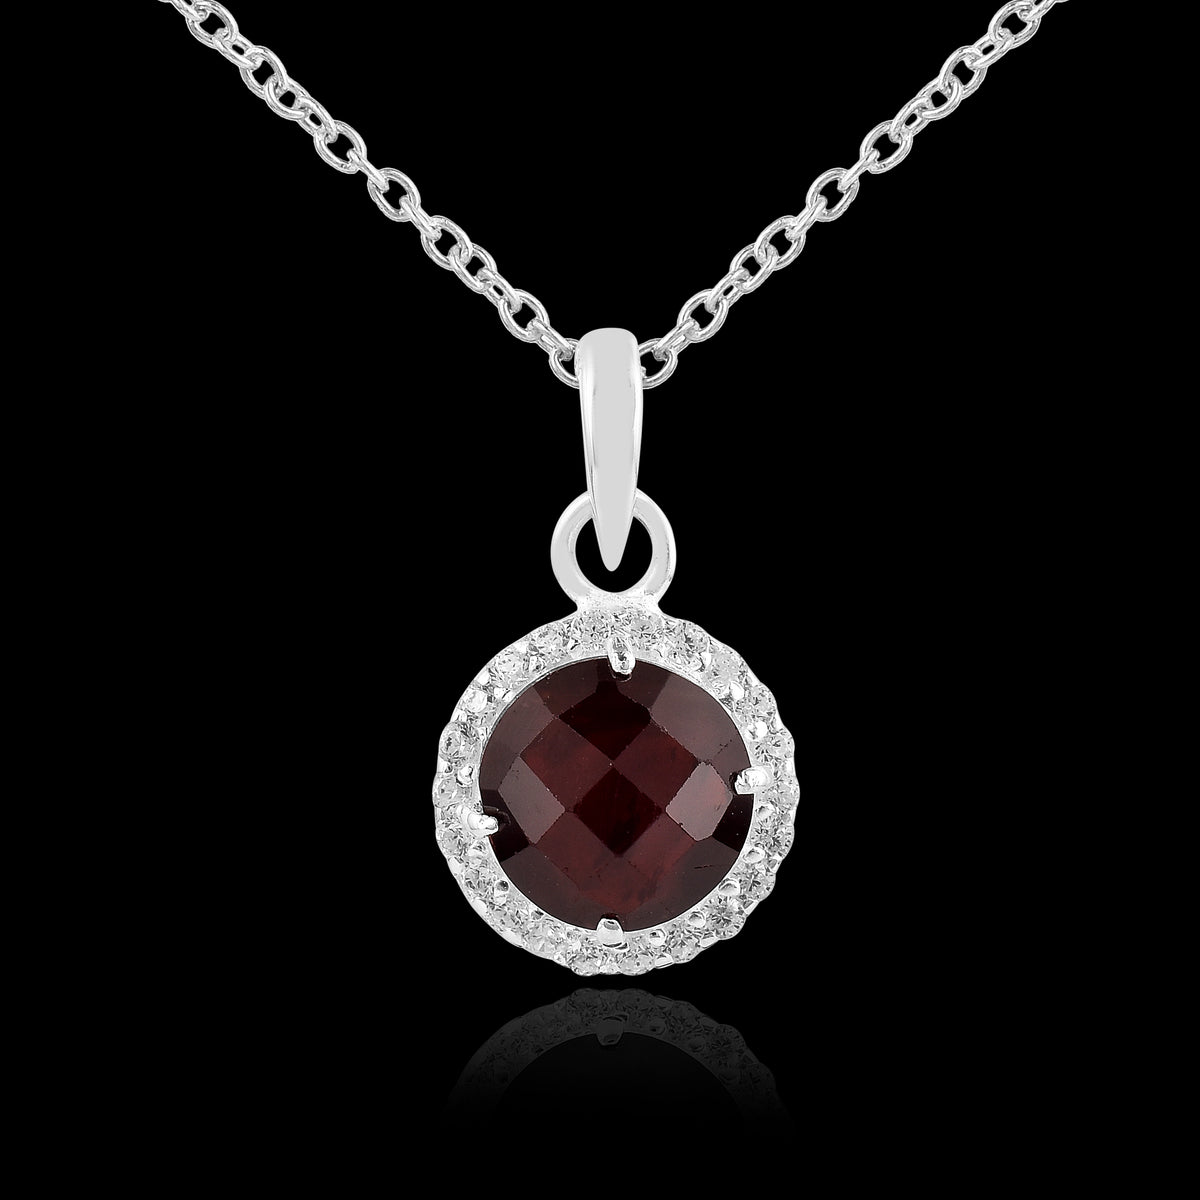 925 Sterling Silver Red Garnet Ball Pendant with Chain Gift for Her